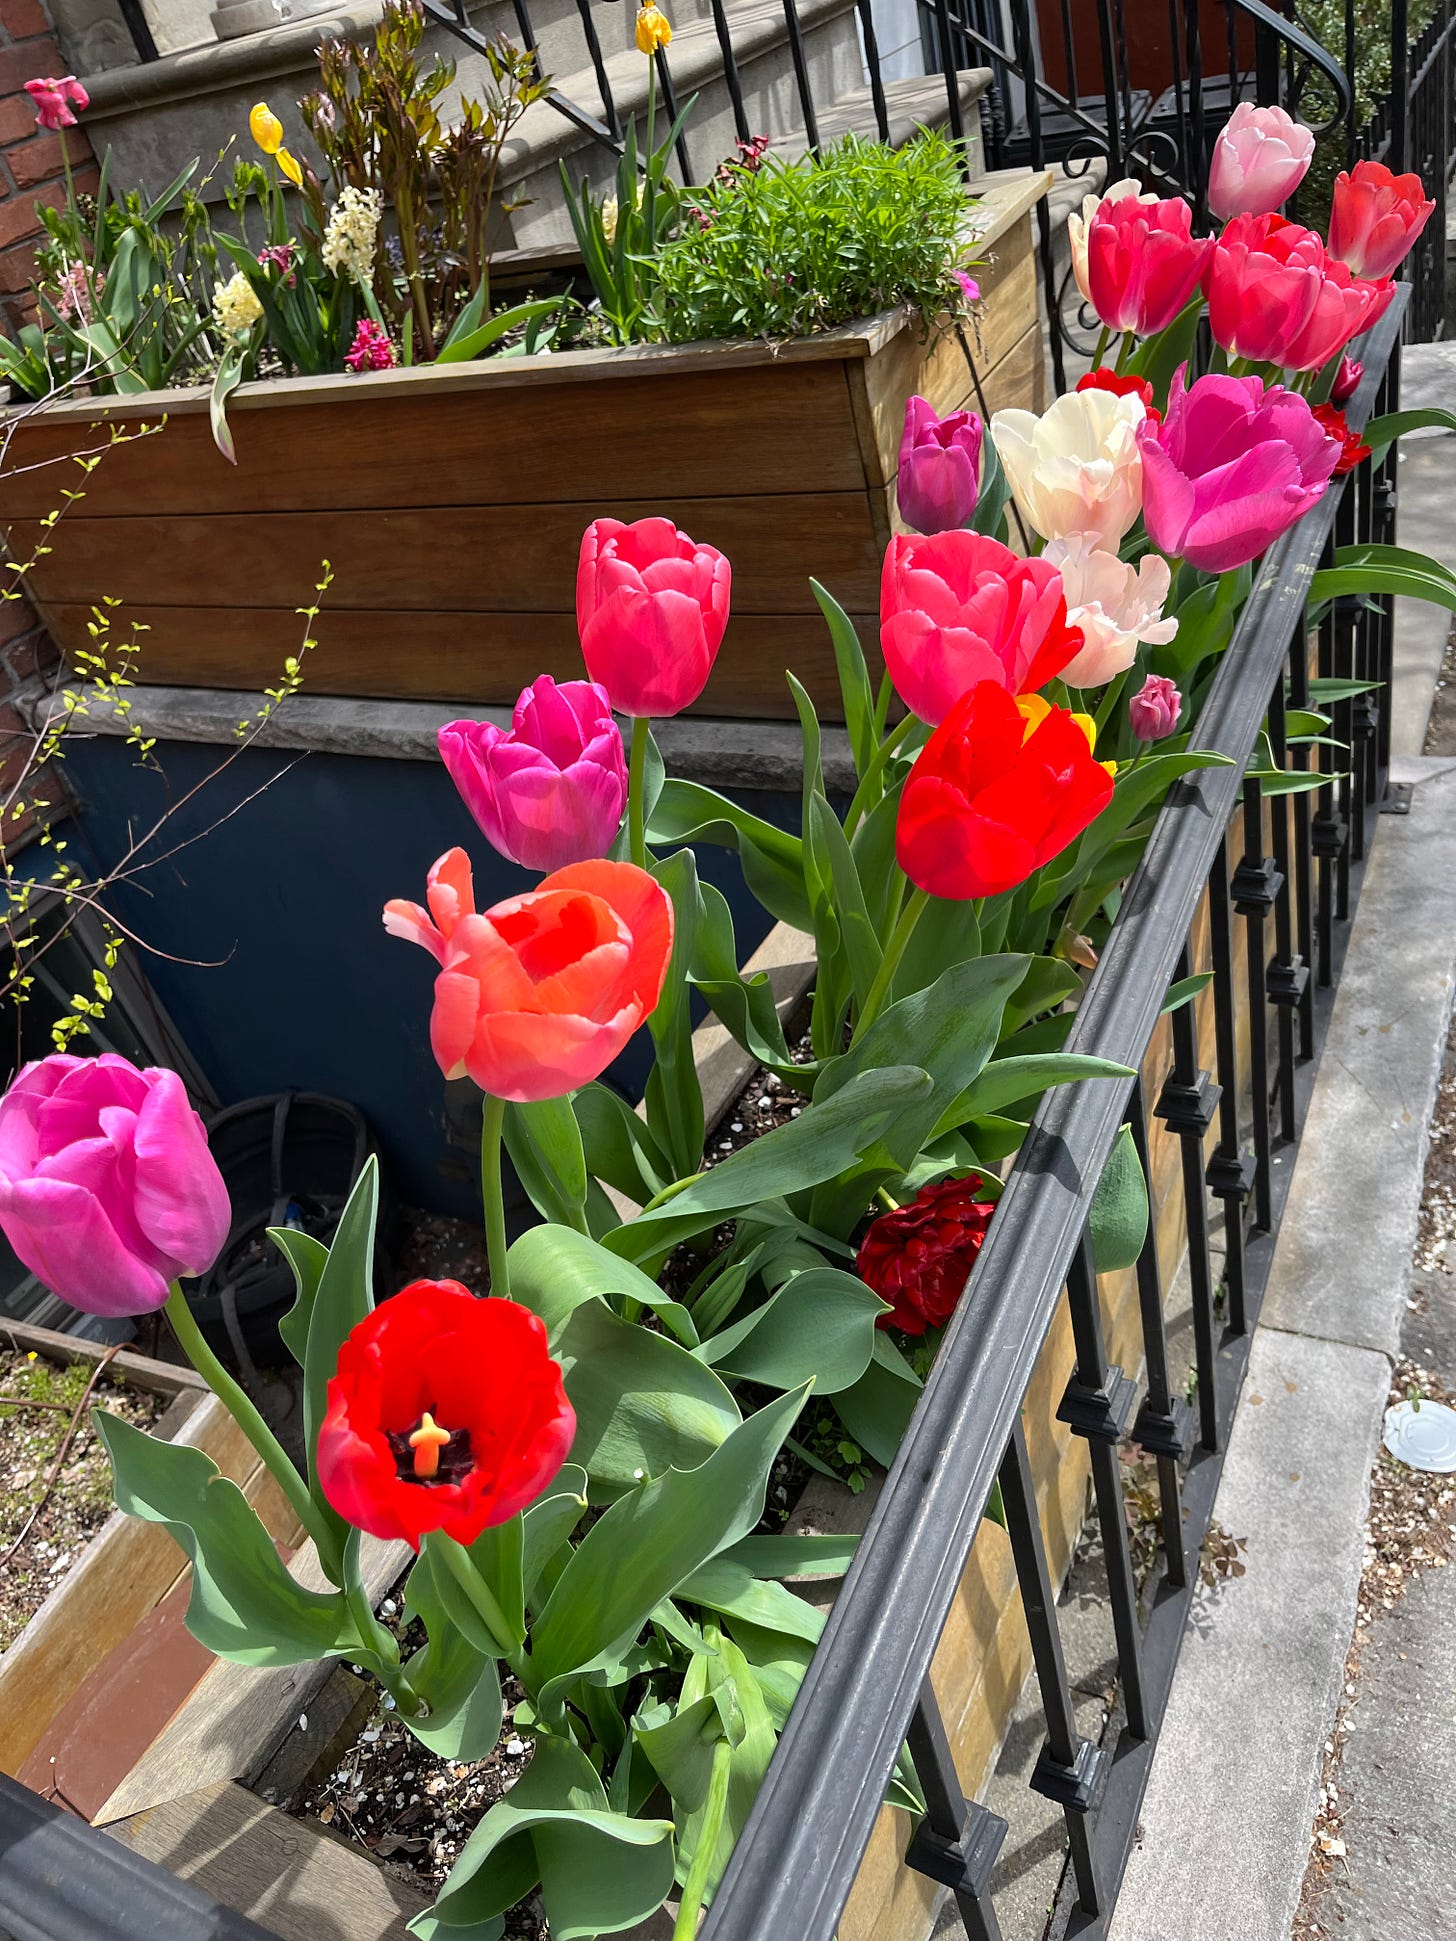 Picture of colorful pink, red, and white tulips outside a stoop of a Brooklyn building.